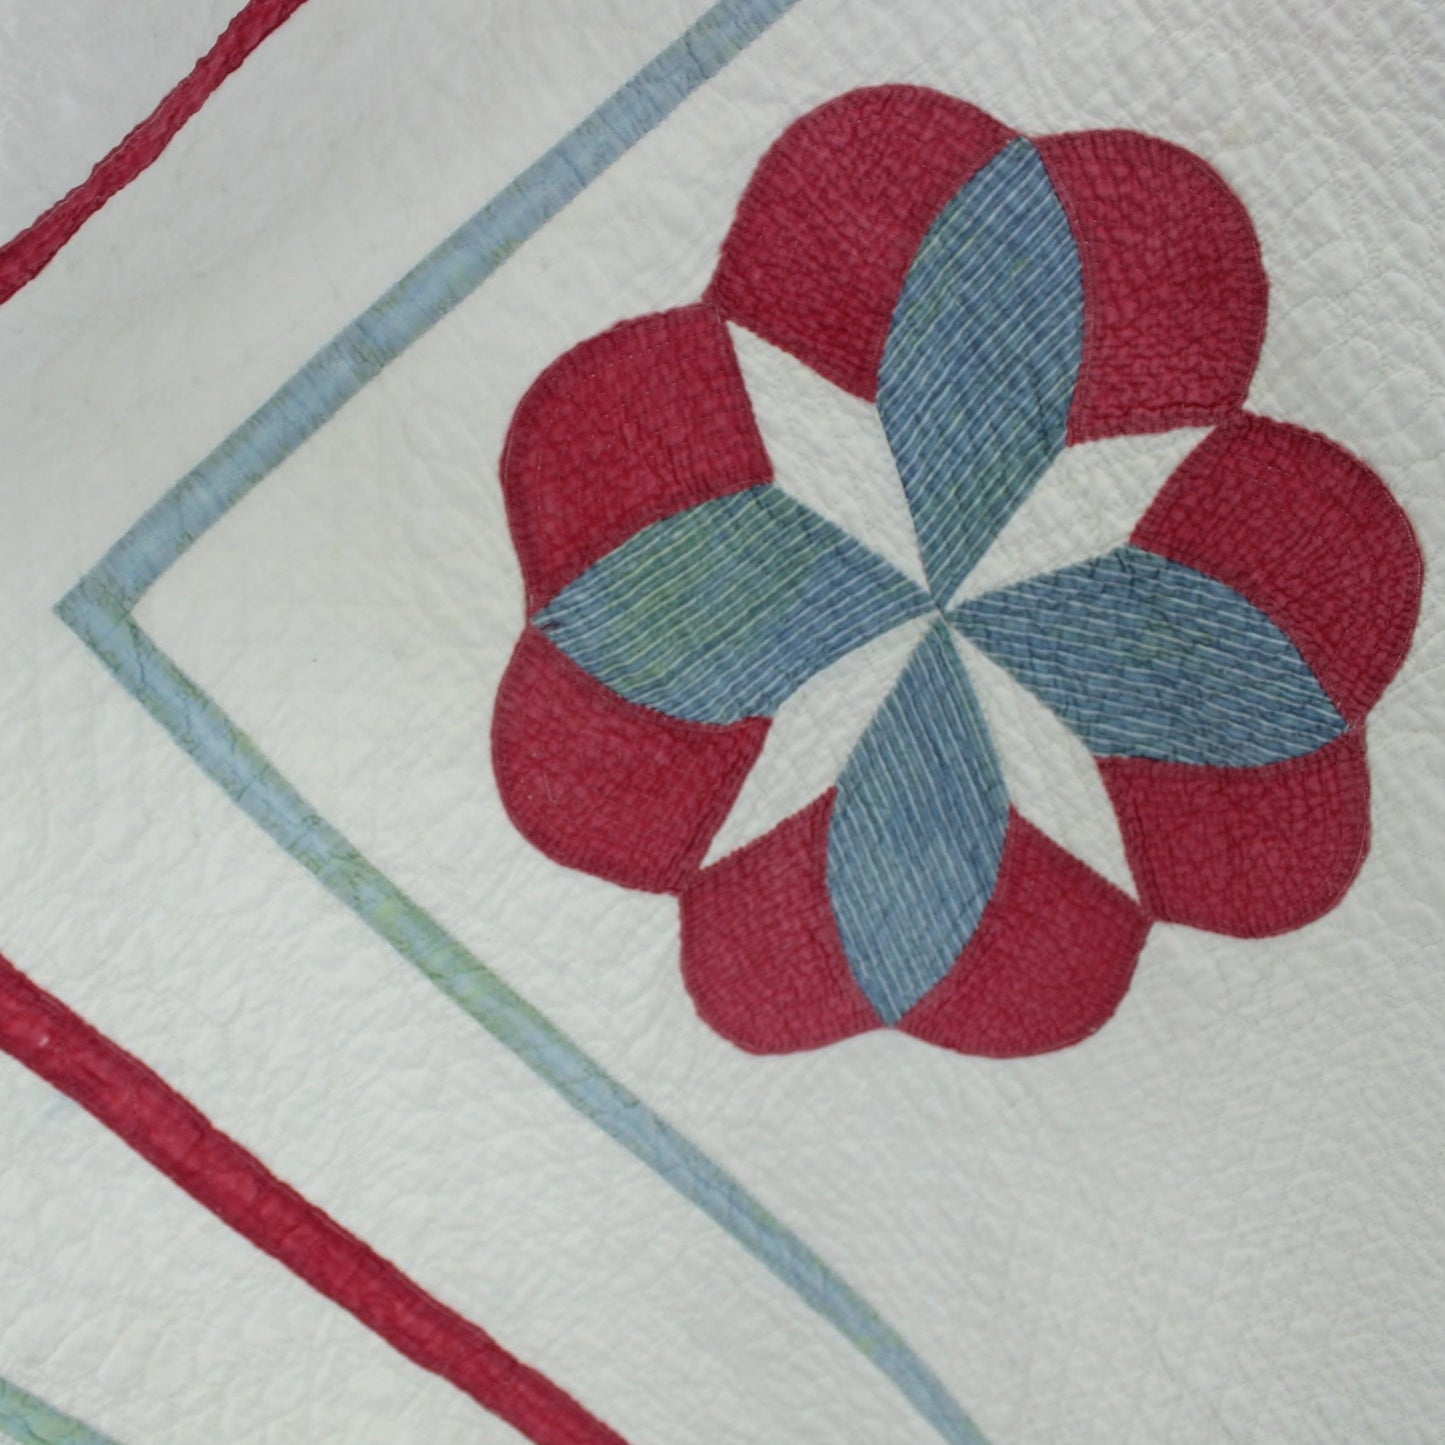 Antique Intricate Hand Stitched Quilt - Early 1900s Cotton Red Blue 9 Design - Natural Cotton Fill 100+ years old